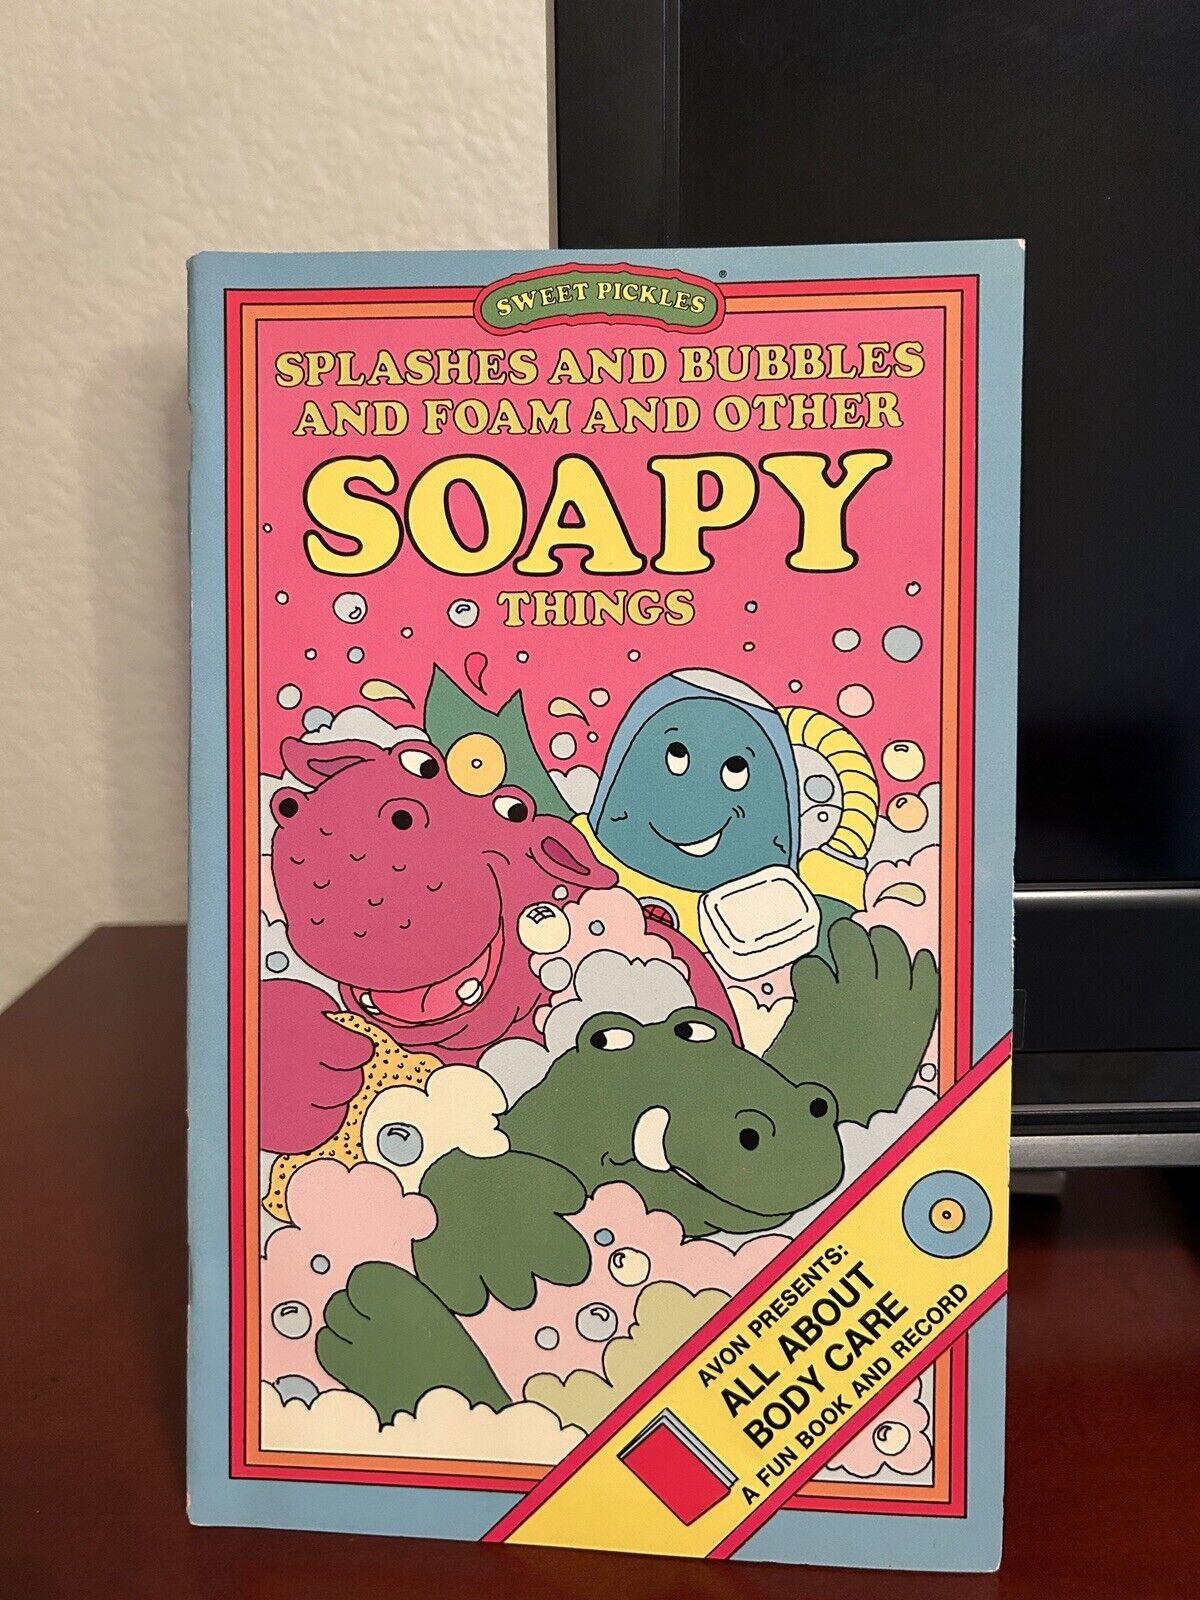 Avon Sweet Pickles Soapy Things Body Care Activity Book and Record  - 1978